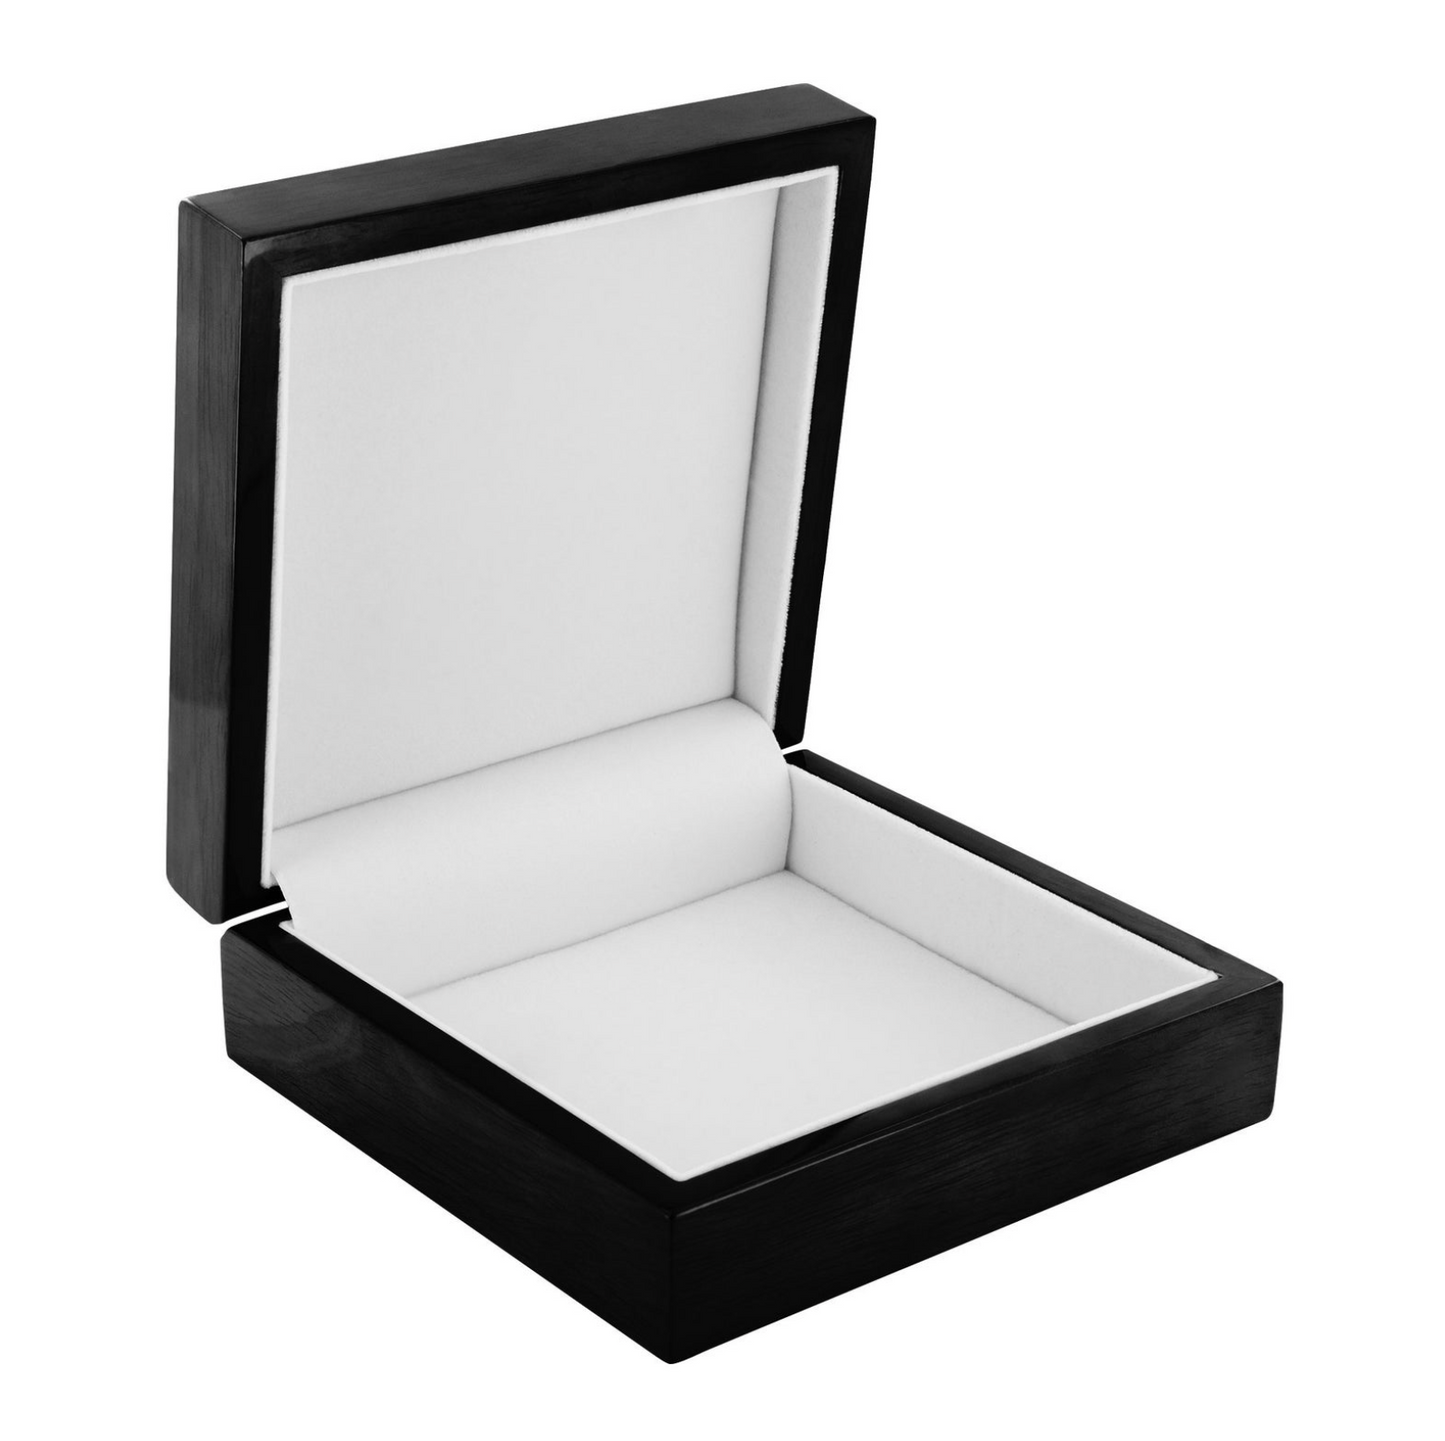 Customizable Keepsake/Jewelry Box -Add your own image or text - Lacquer Box